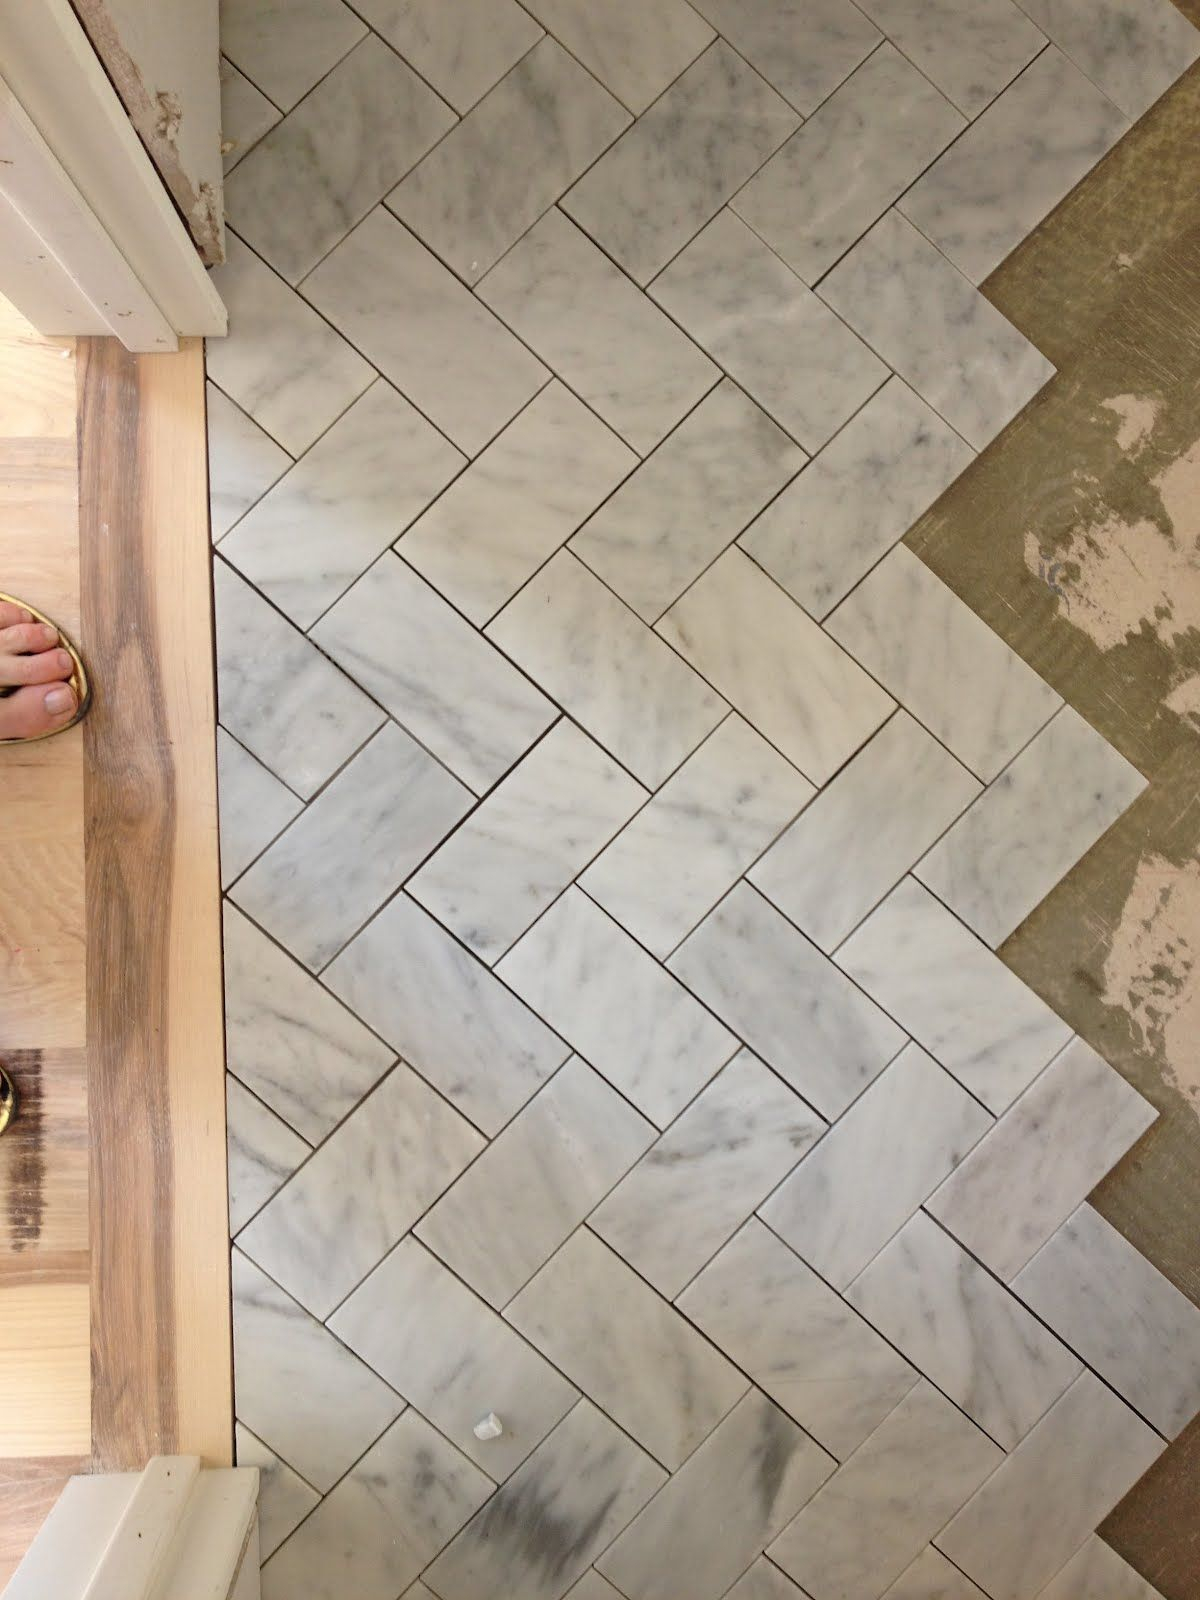 Subway Tile In A Herringbone Pattern On The Floor intended for size 1200 X 1600